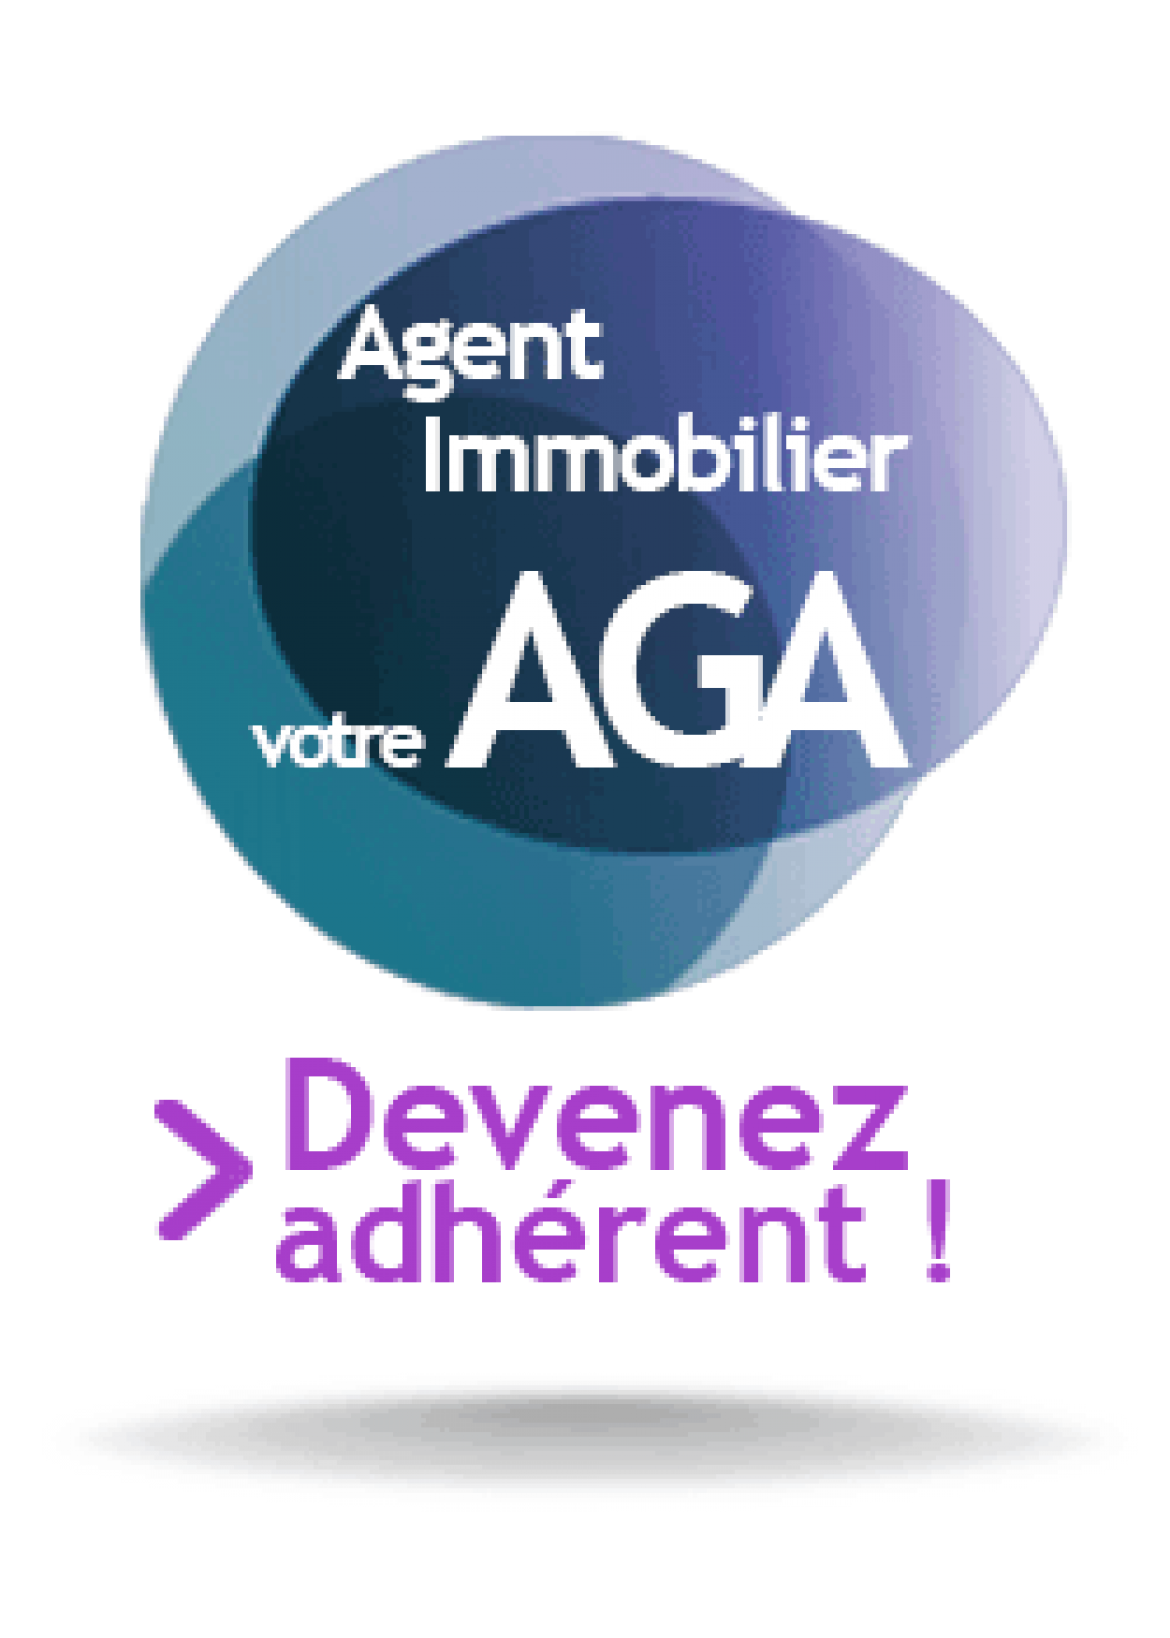 AGA Agent Immobilier